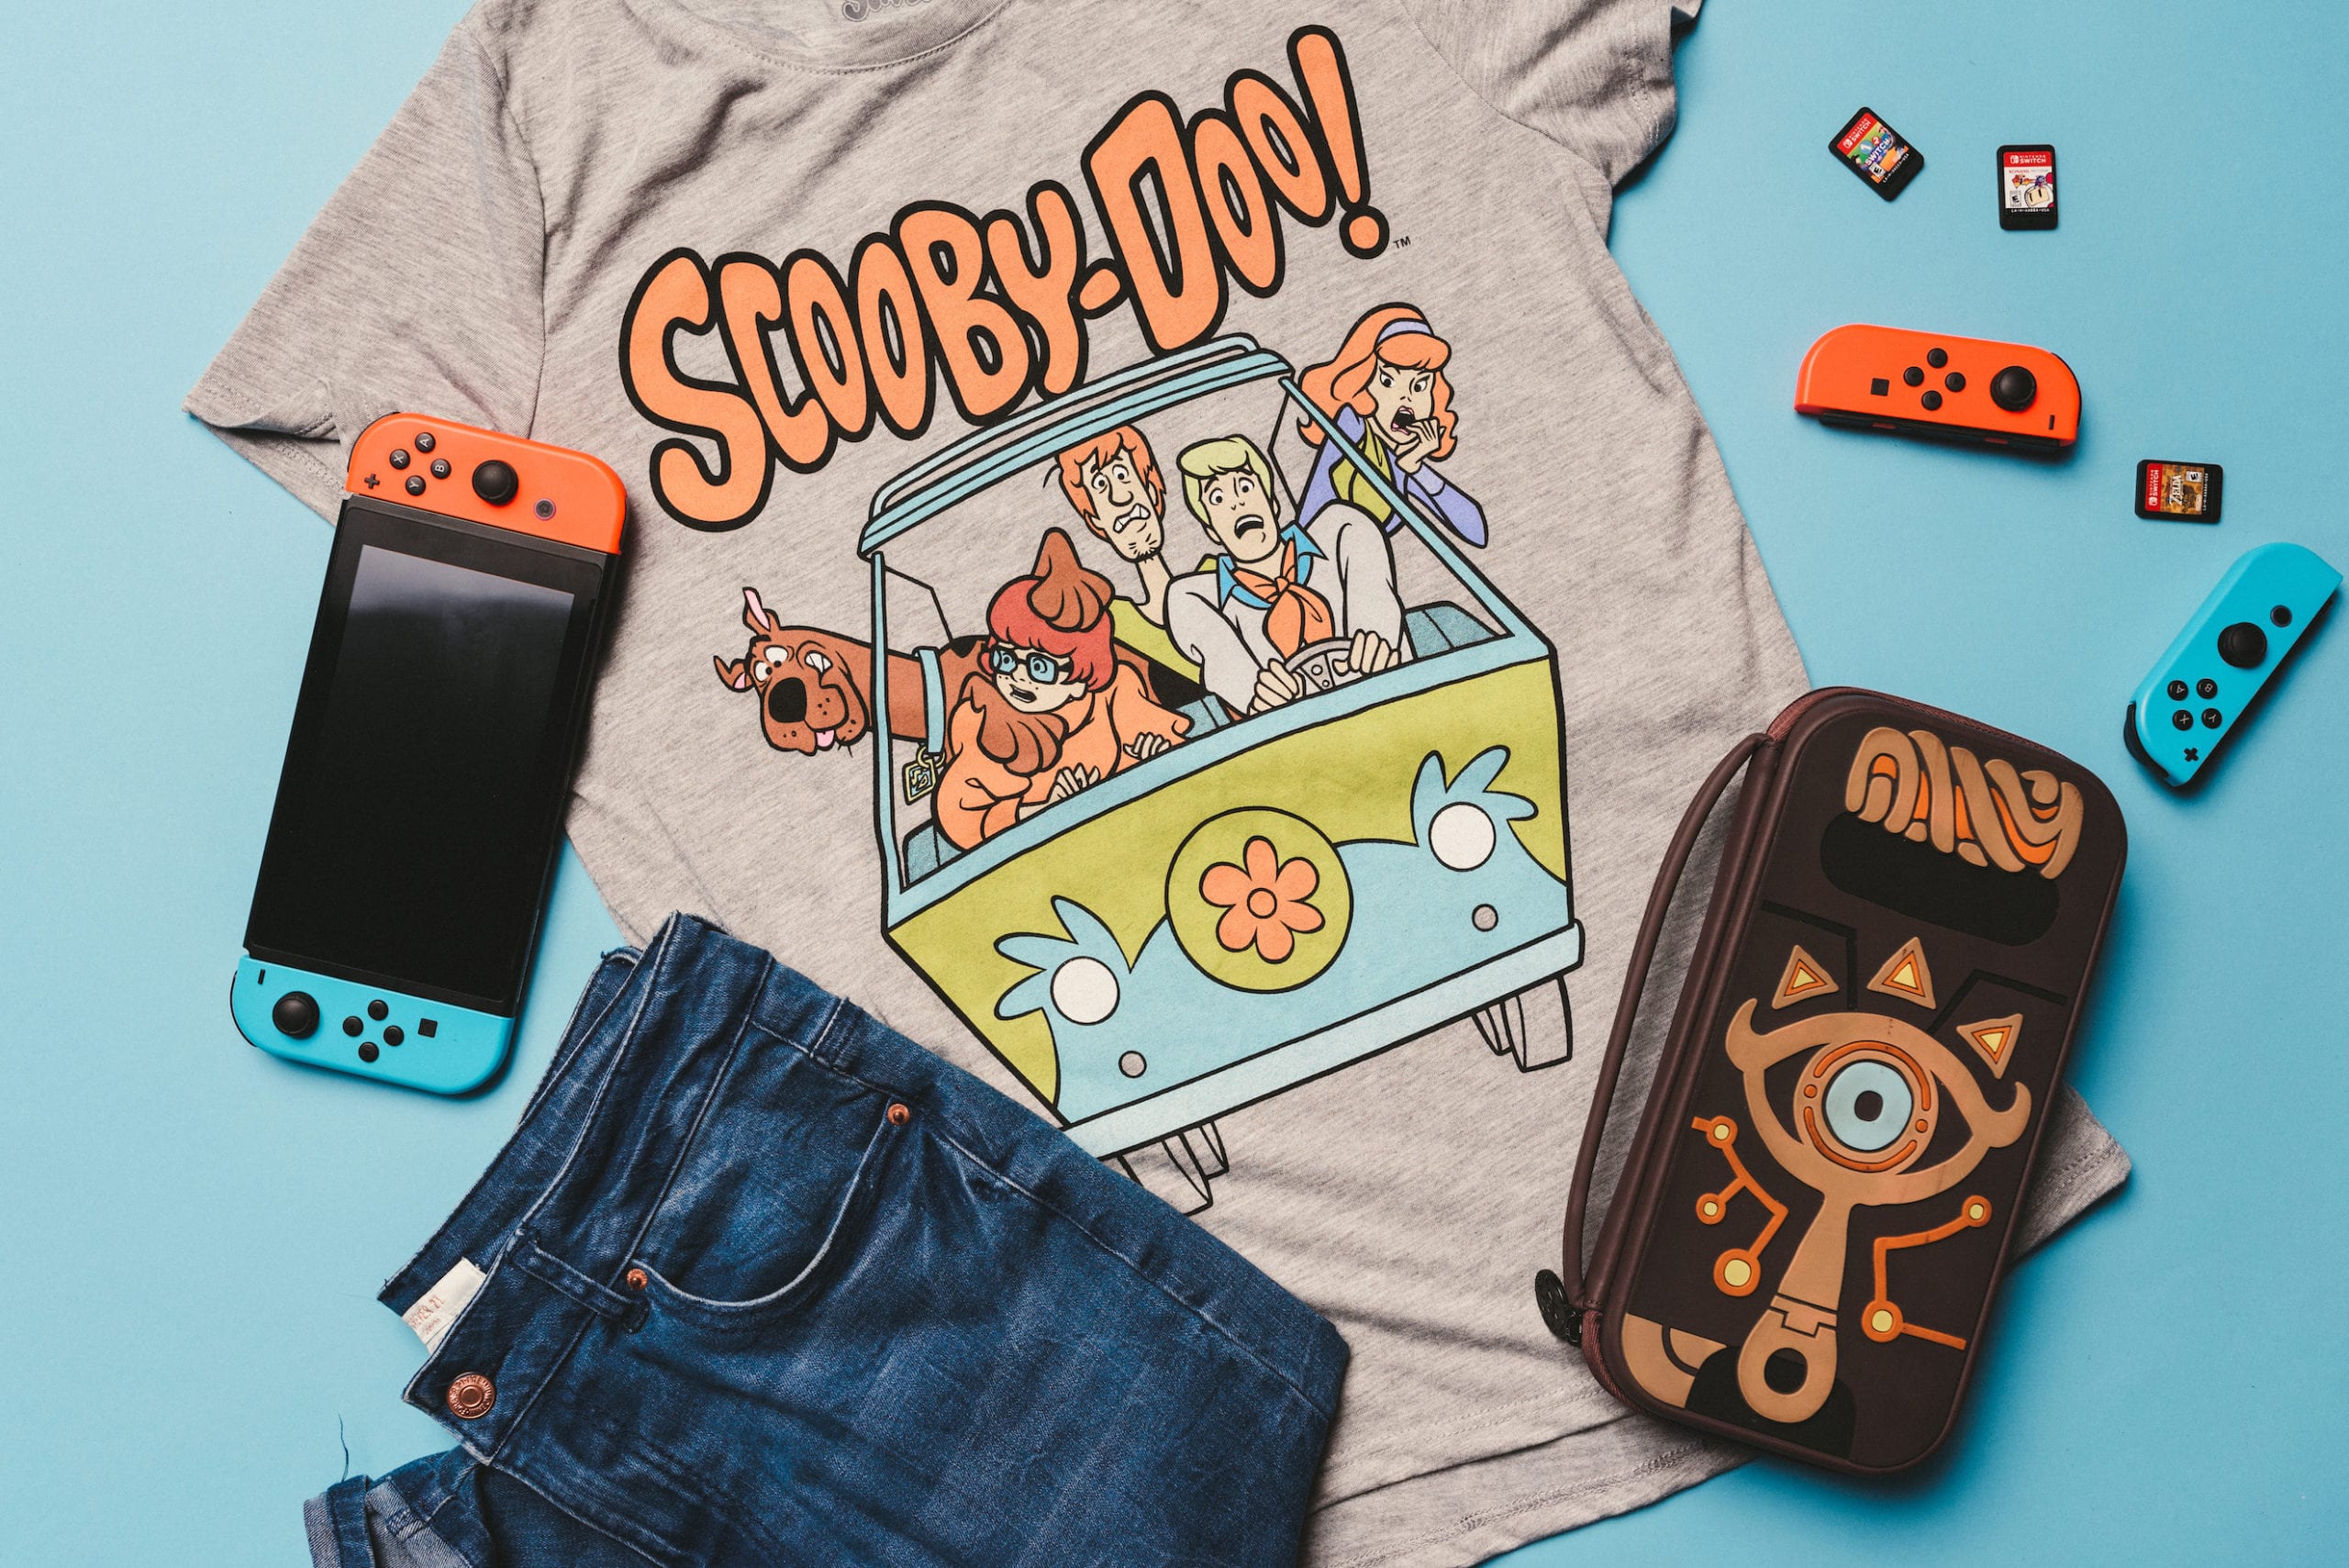 Heart Piece Plus Media Day Branding Gray Scooby Doo t shirt, jeans, game controller and purse on display